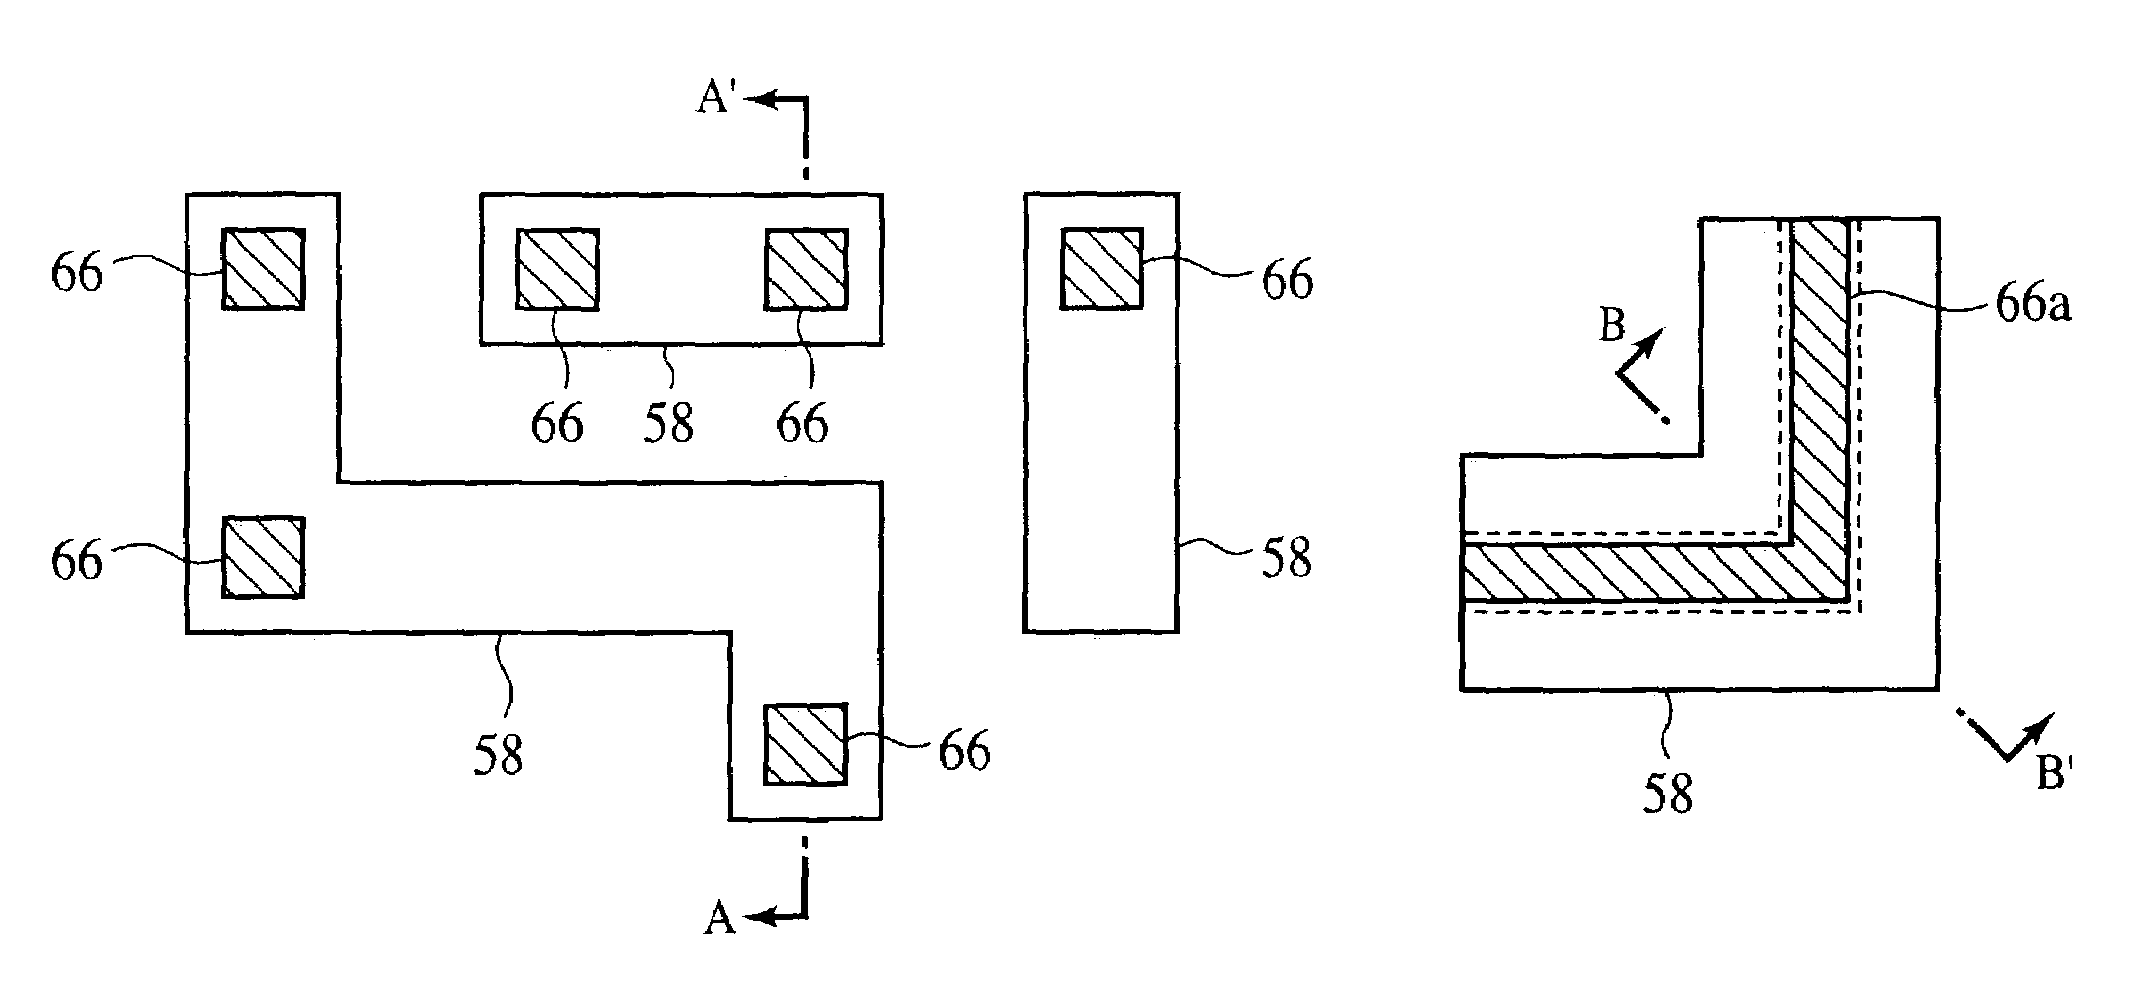 Semiconductor device for preventing defective filling of interconnection and cracking of insulating film